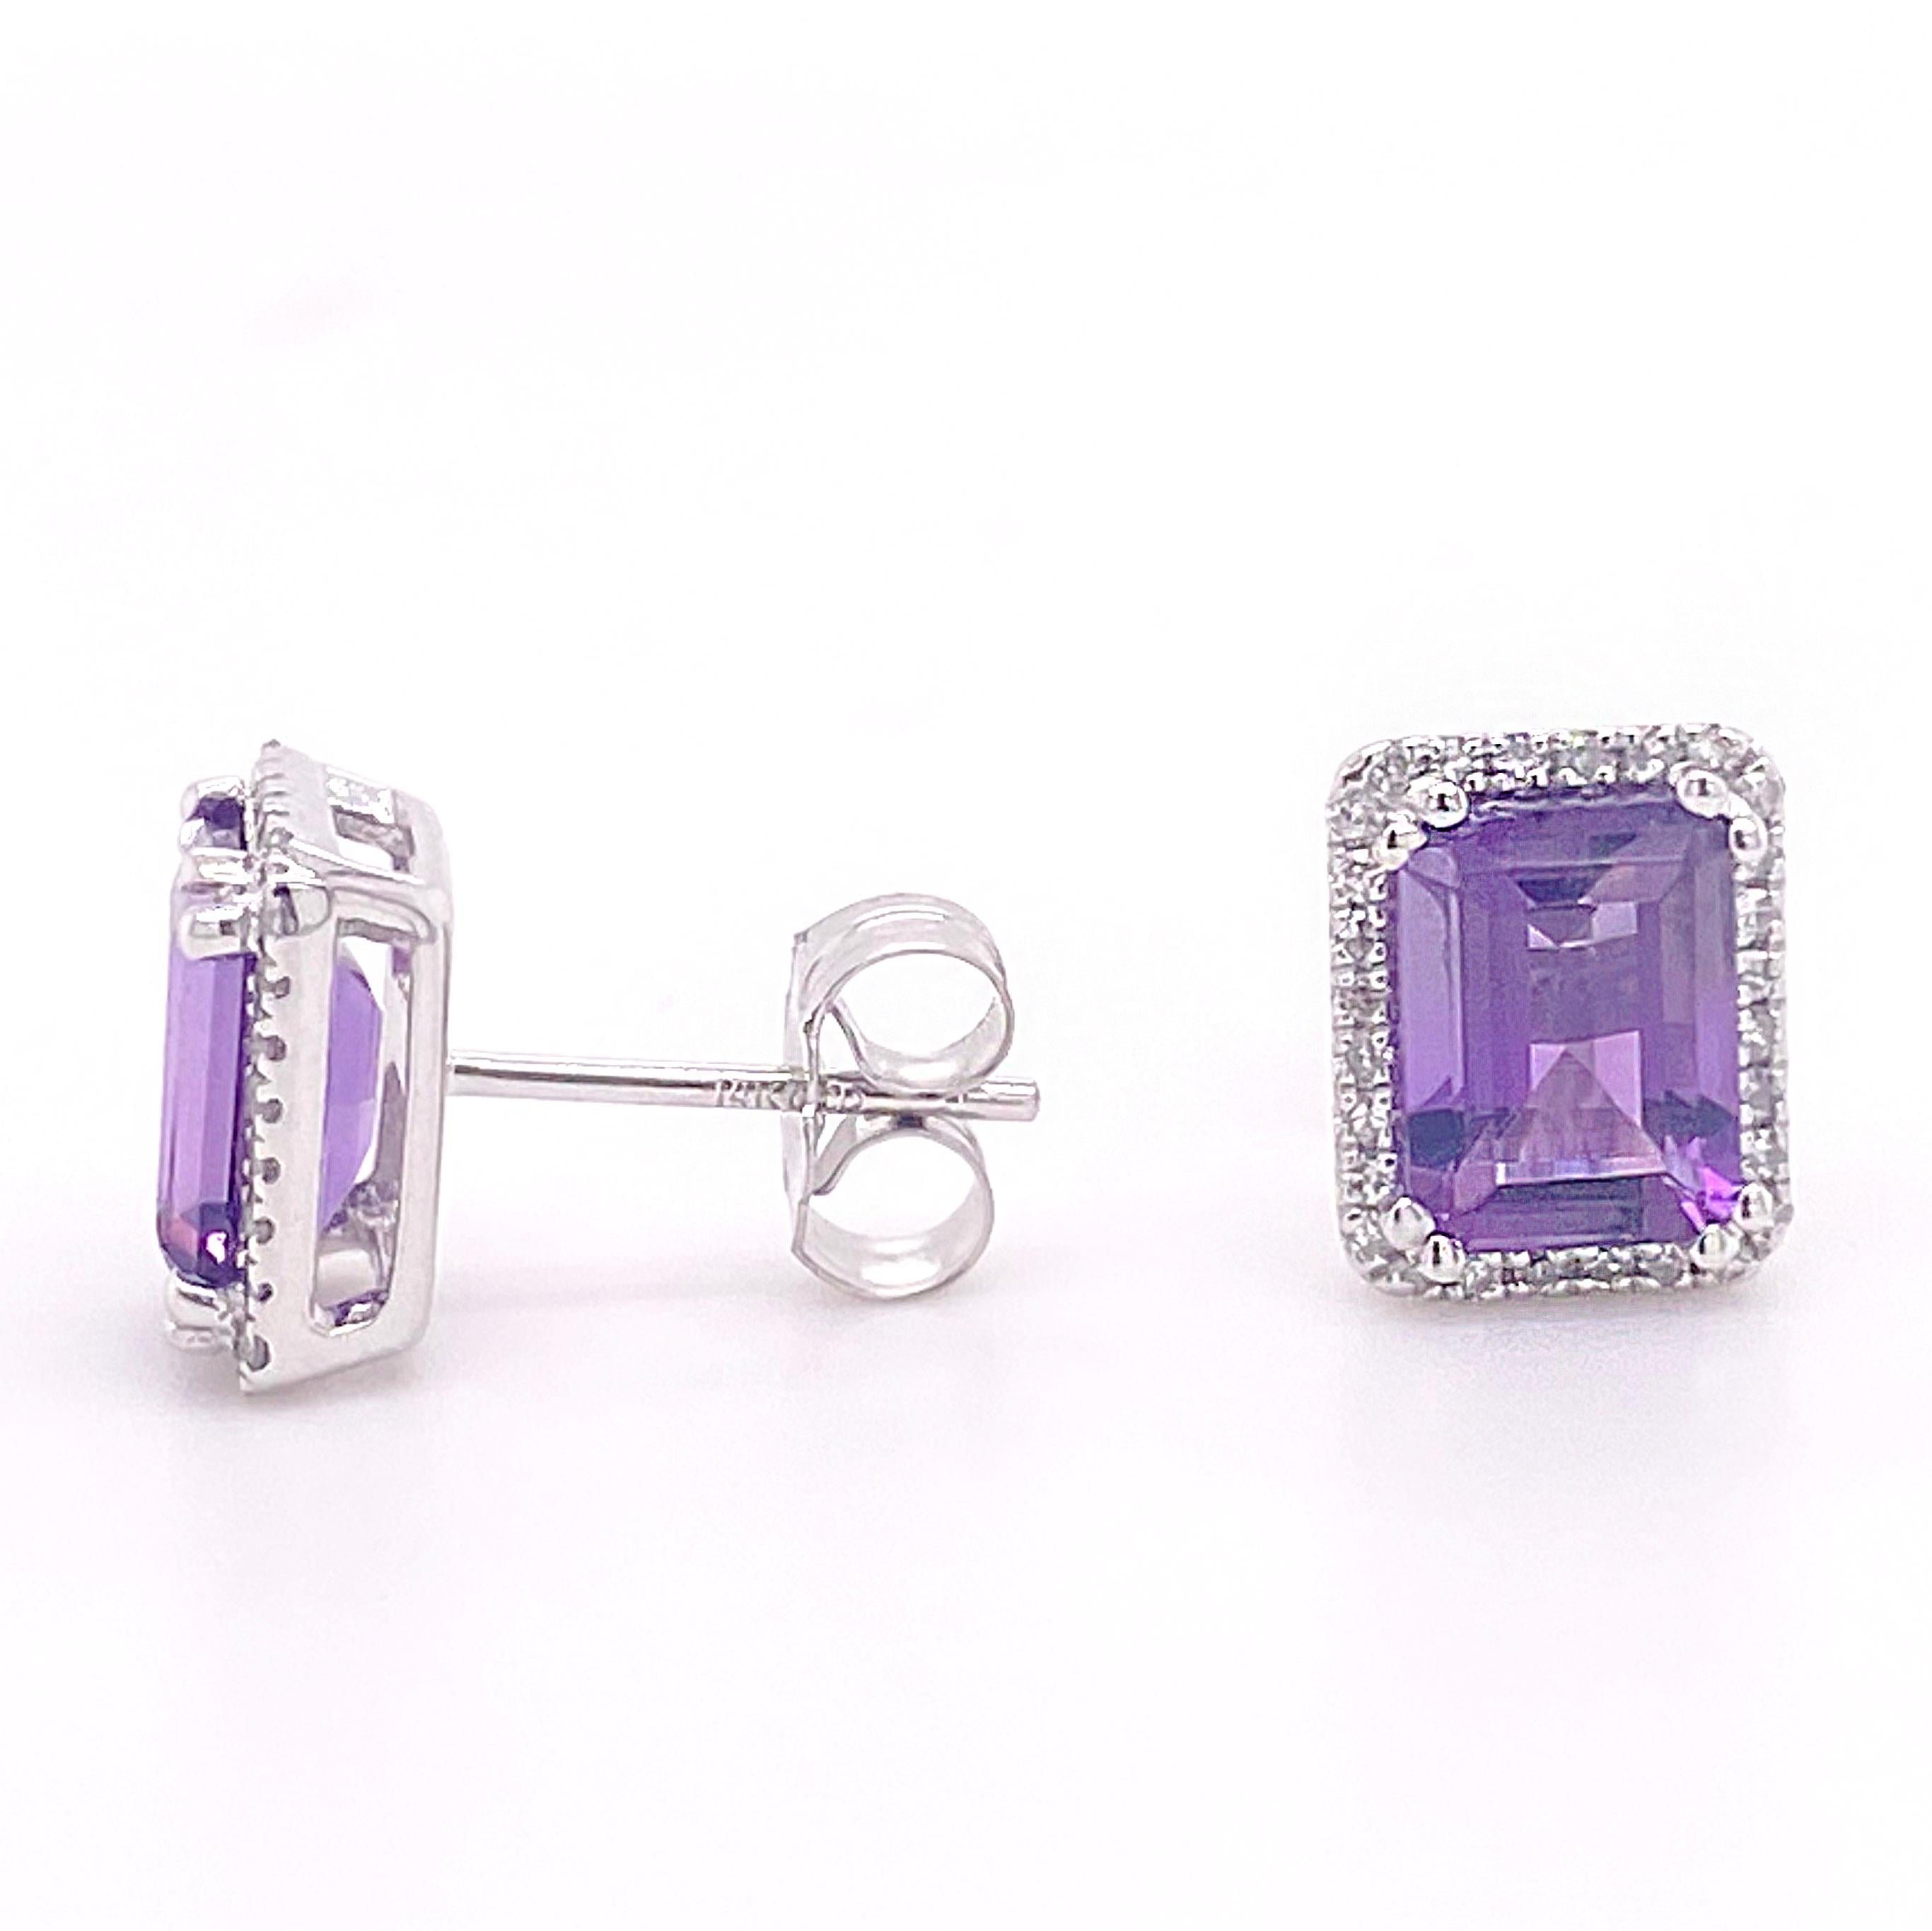 These gorgeous stud earrings have an emerald cut amethyst in the center and is surrounded by 28 natural diamonds. The halo diamonds is a perfect accent for the purple amethyst. Our jewelers have designed these earrings to go in your center piercing